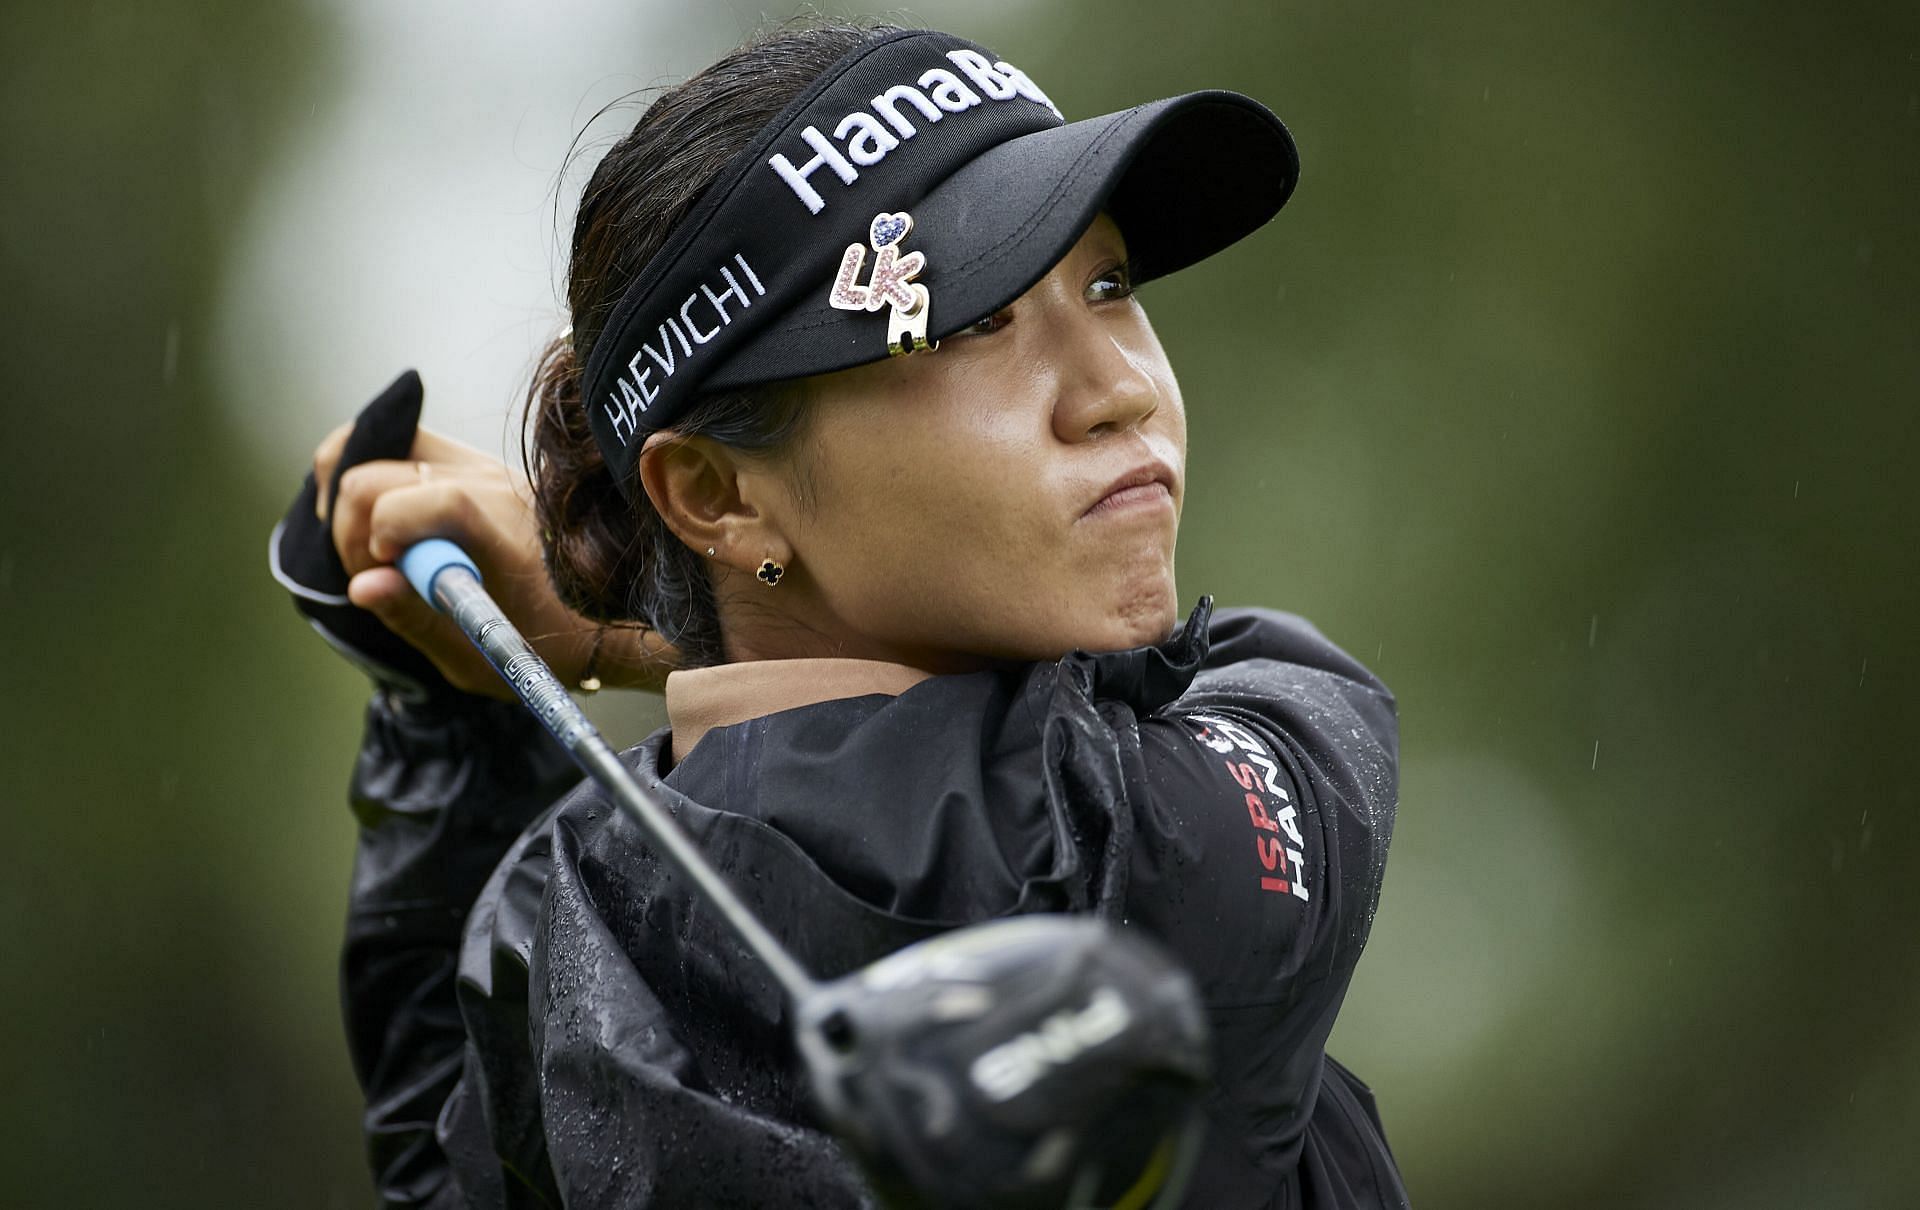 Lydia Ko tees off on the 17th hole during the first round of the LPGA Portland Classic